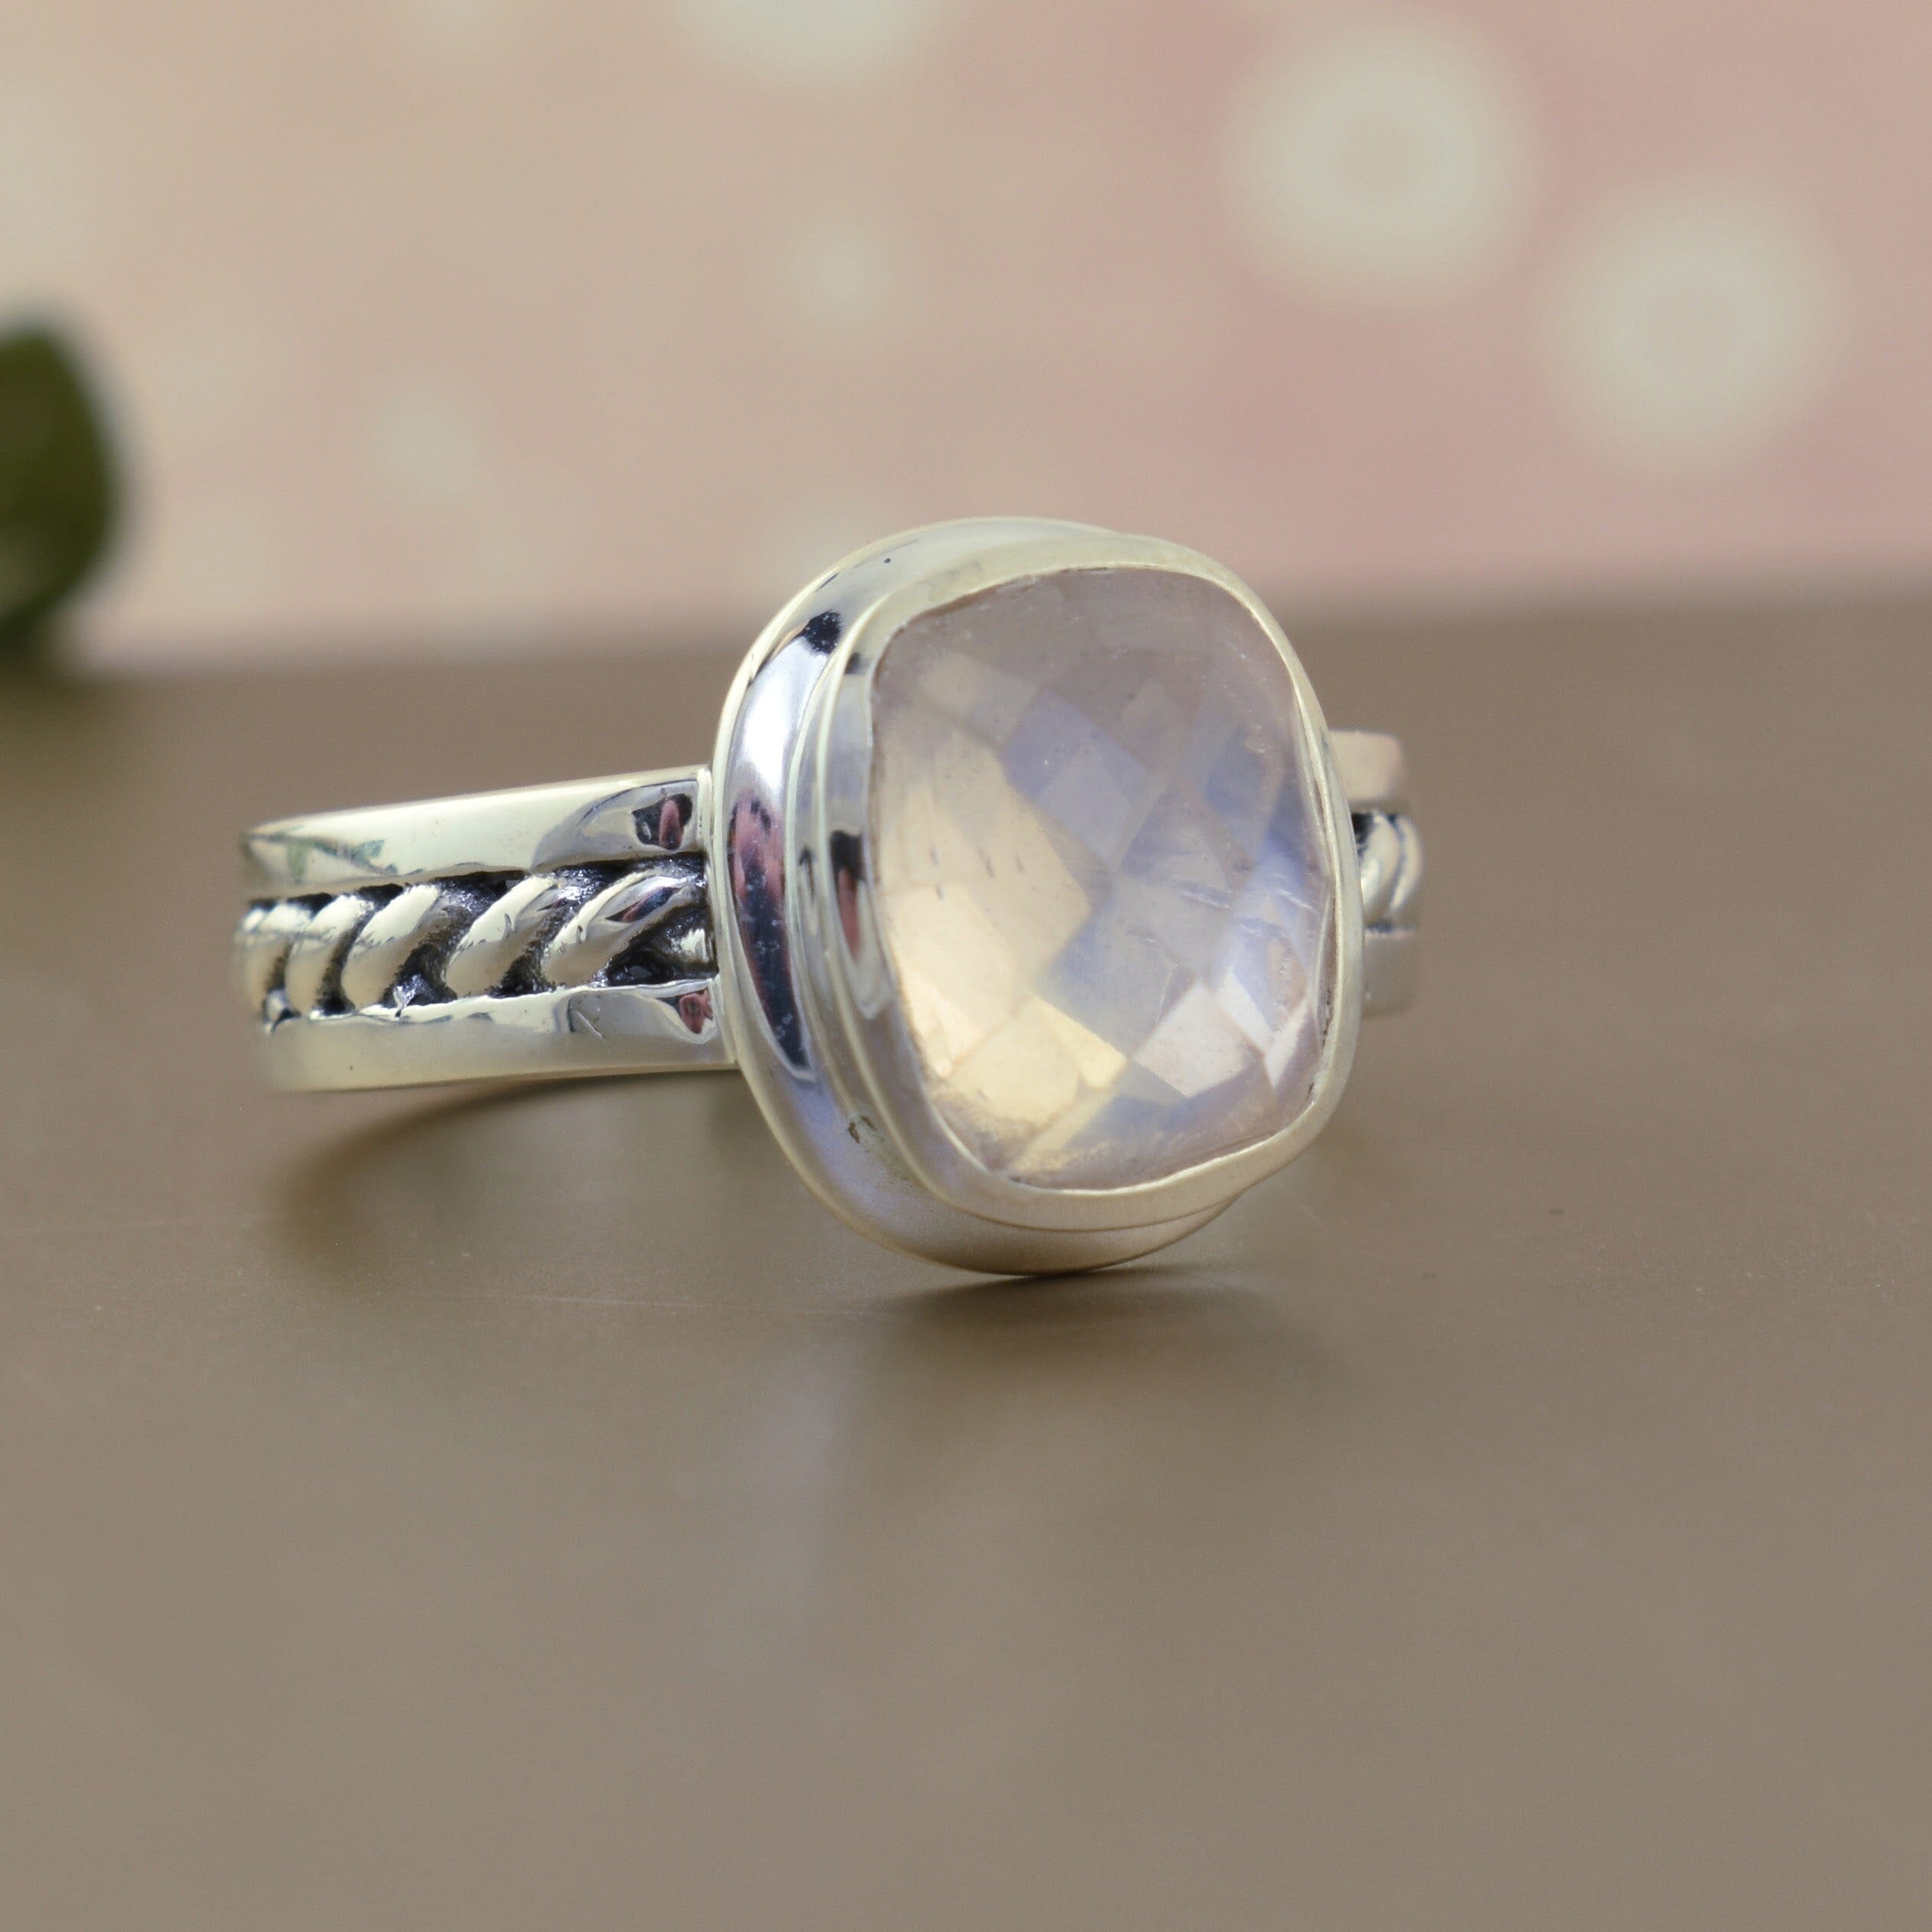 .925 sterling silver ring with hint of pink rose quartz stone